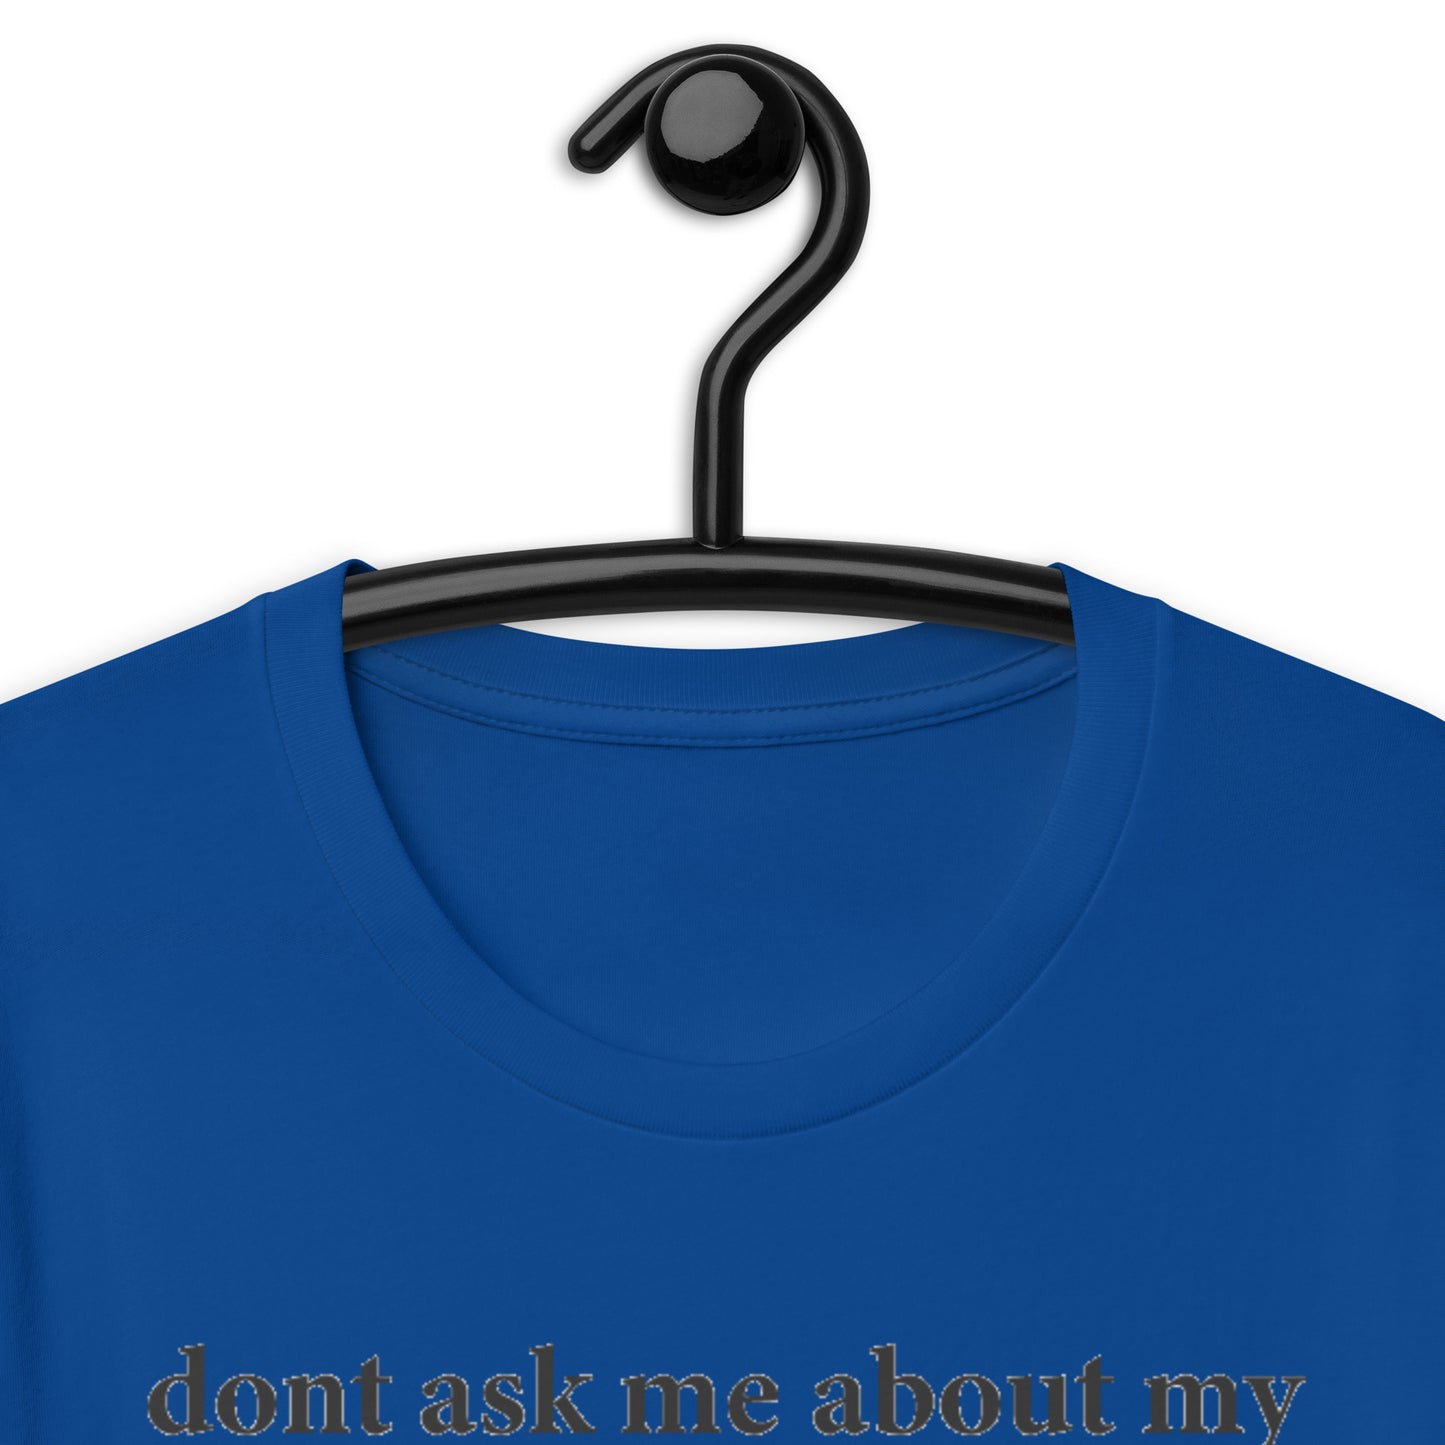 dont ask me about my grades or college or job or relationship status Unisex t-shirt